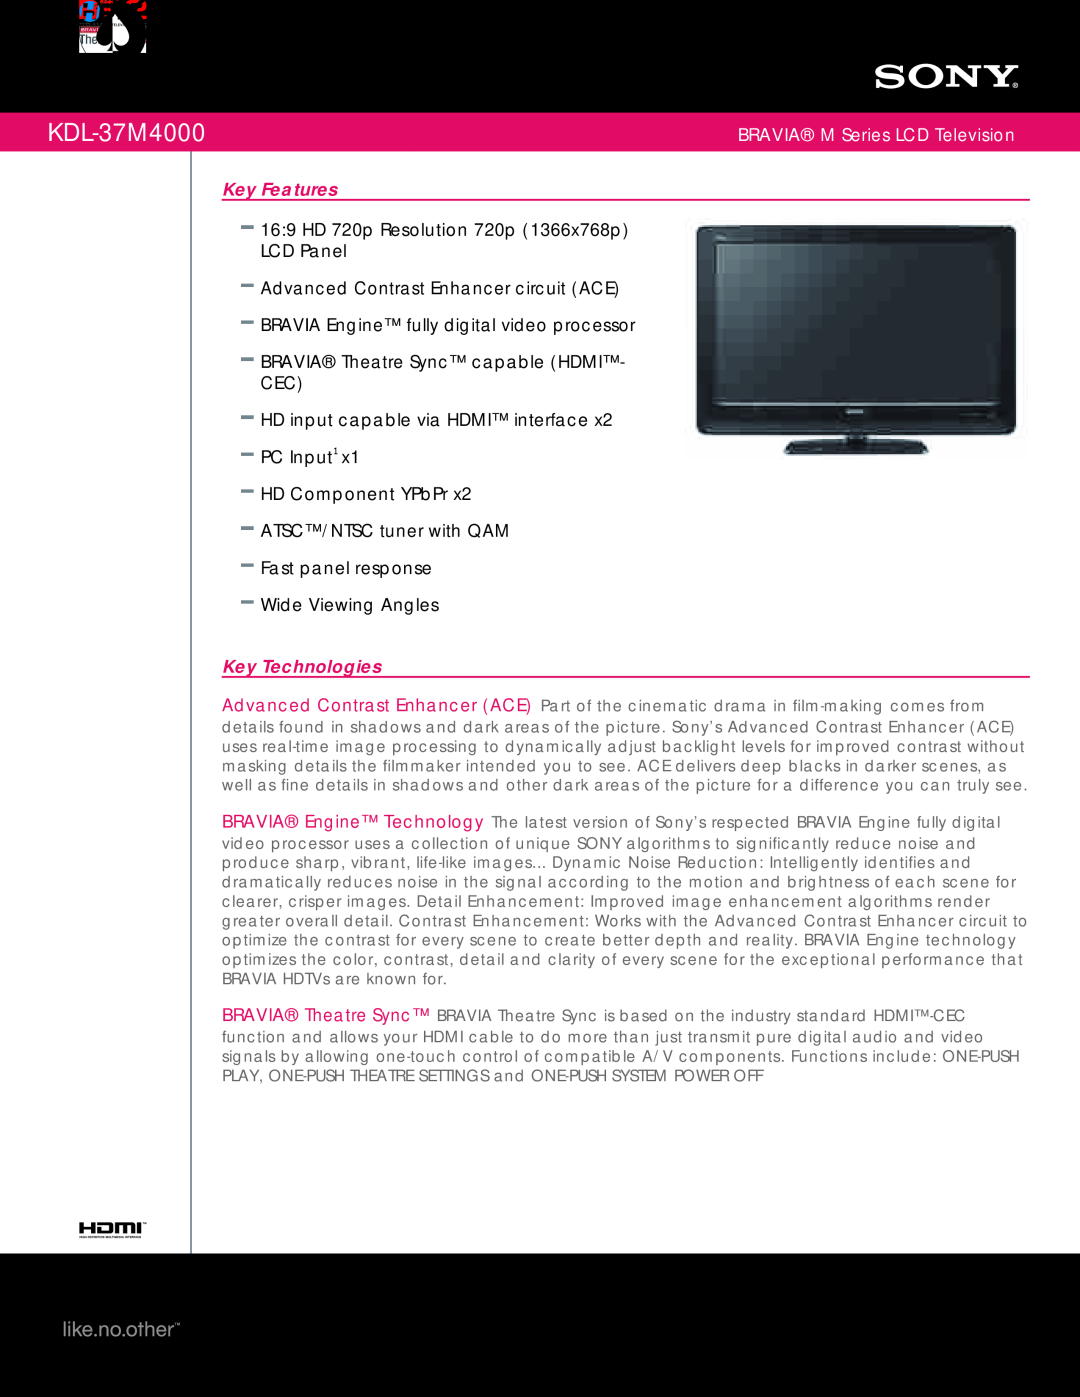 Sony KDL-37M4000 manual BRAVIA M Series LCD Television, Key Features, 169 HD 720p Resolution 720p 1366x768p LCD Panel 